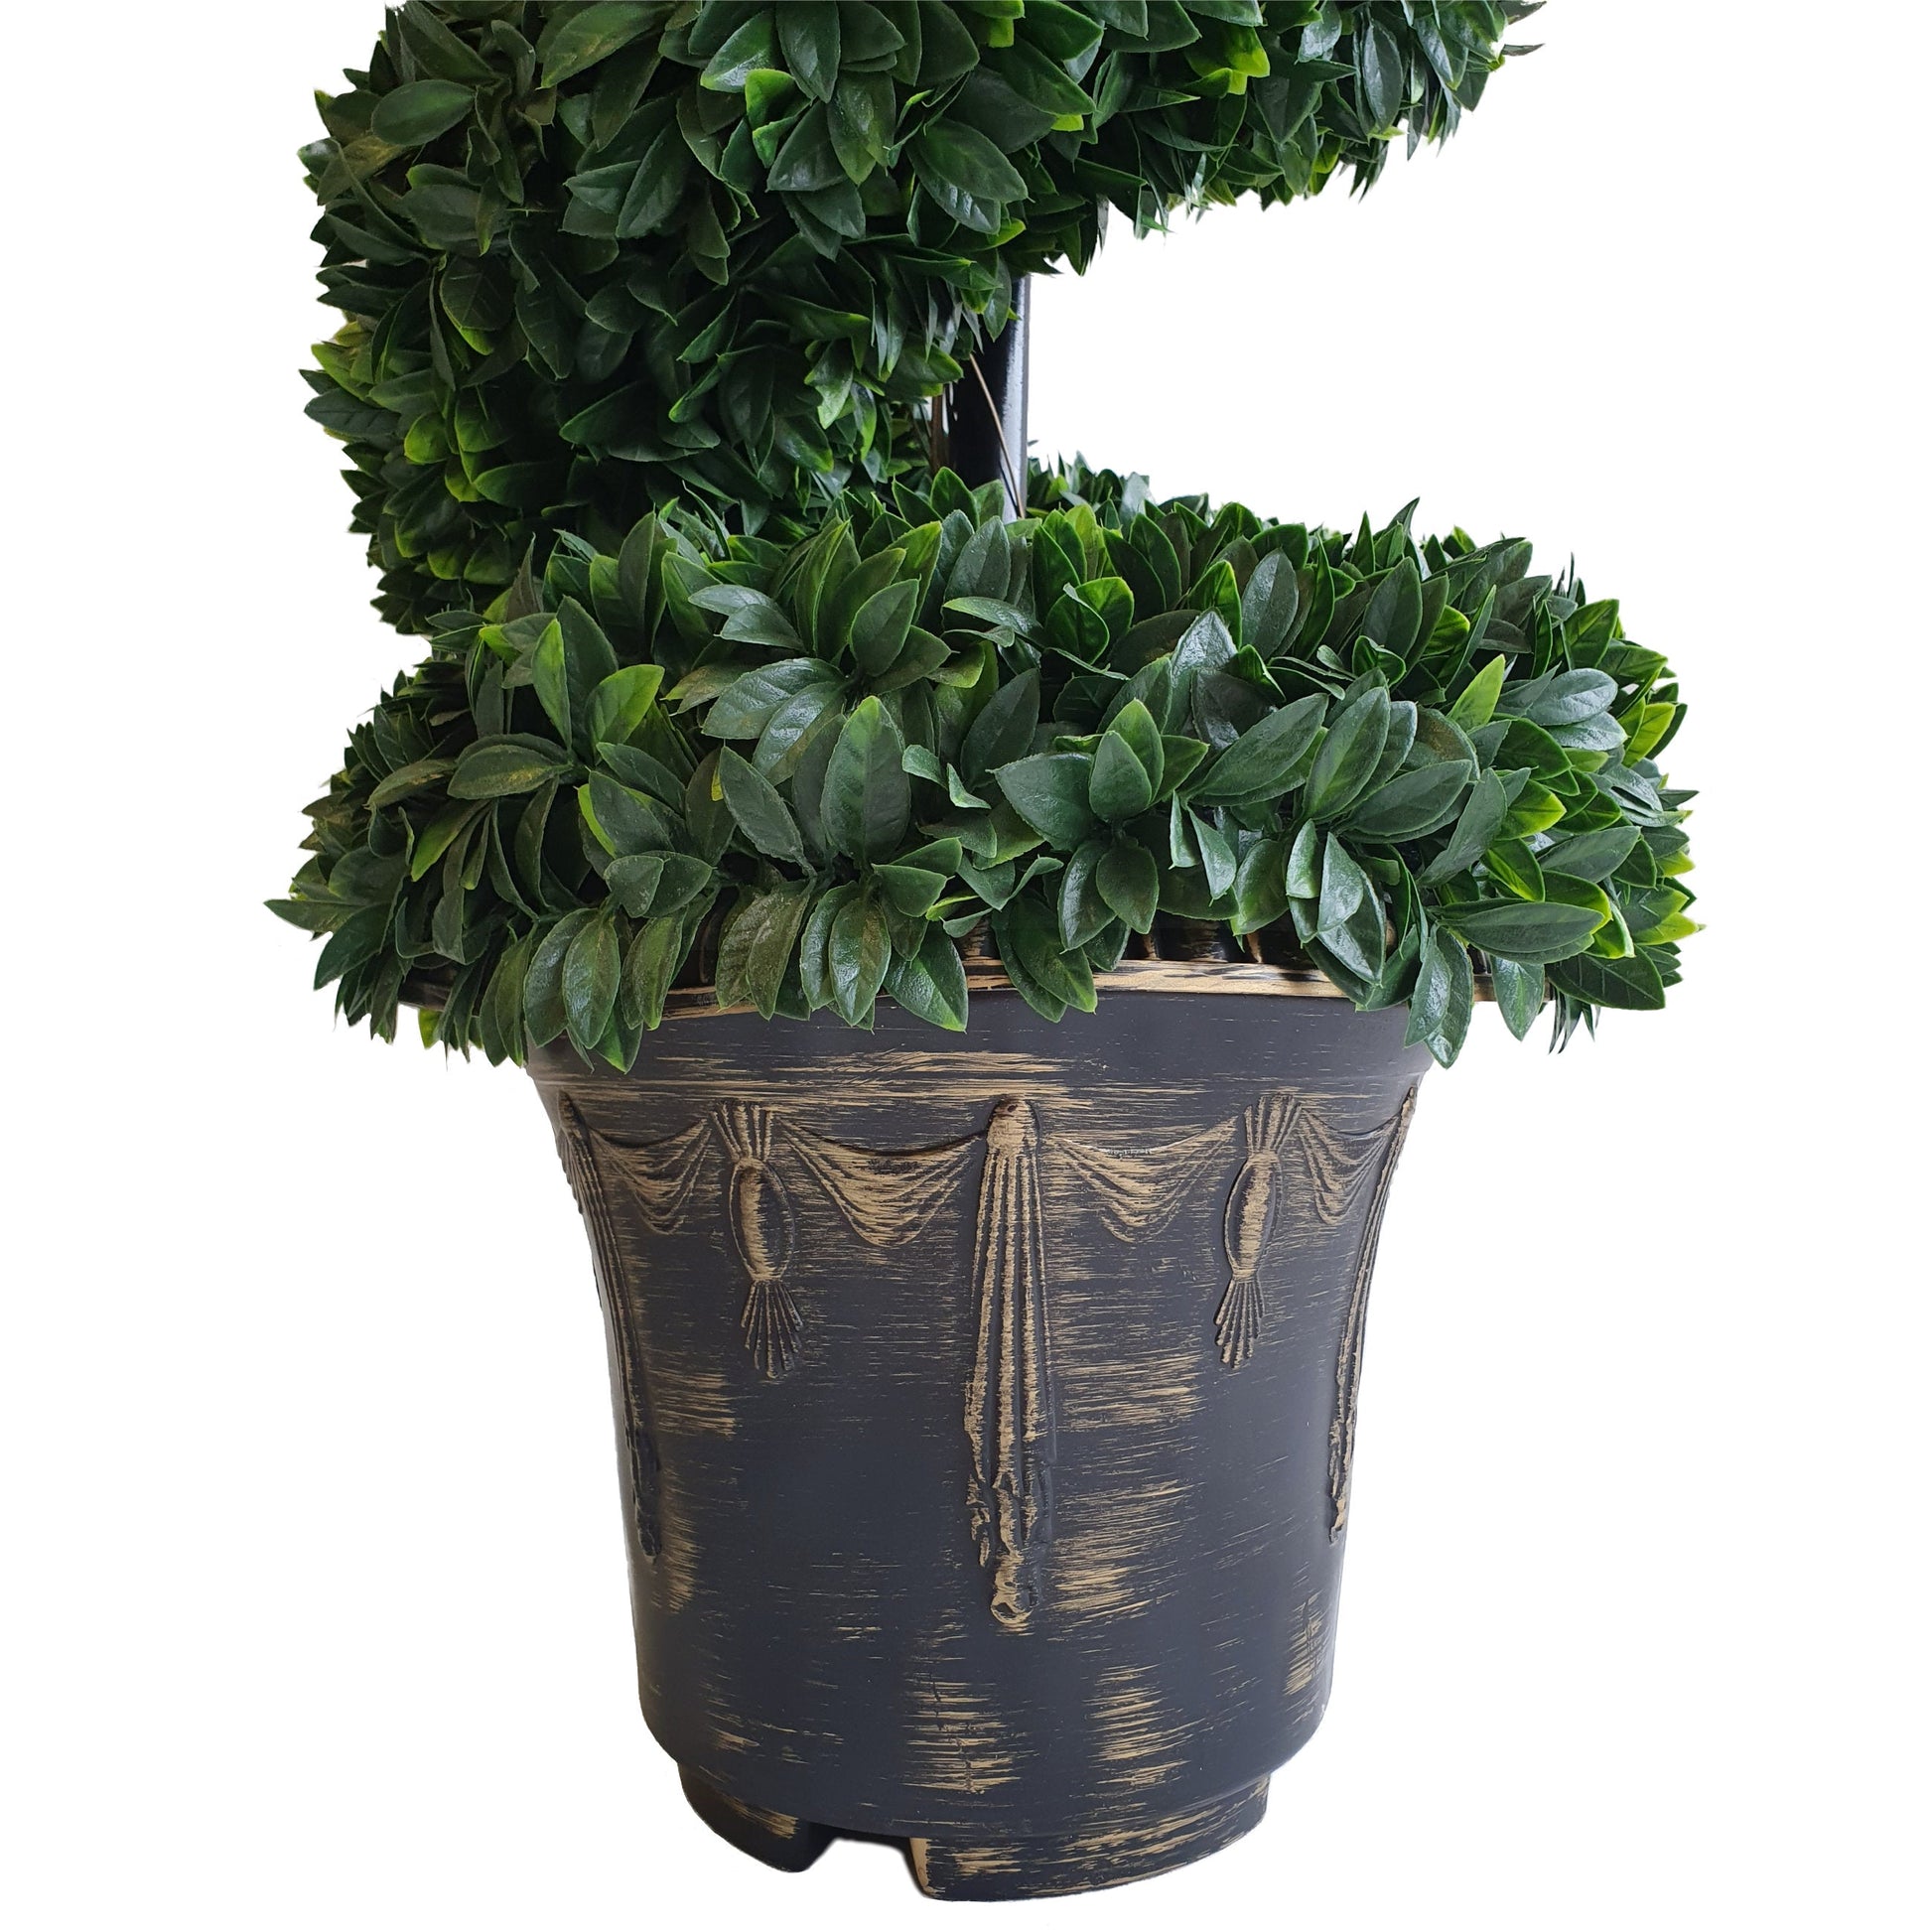 Large Leaf Boxwood Spiral Topiary Trees with Decorative Planter 120cm